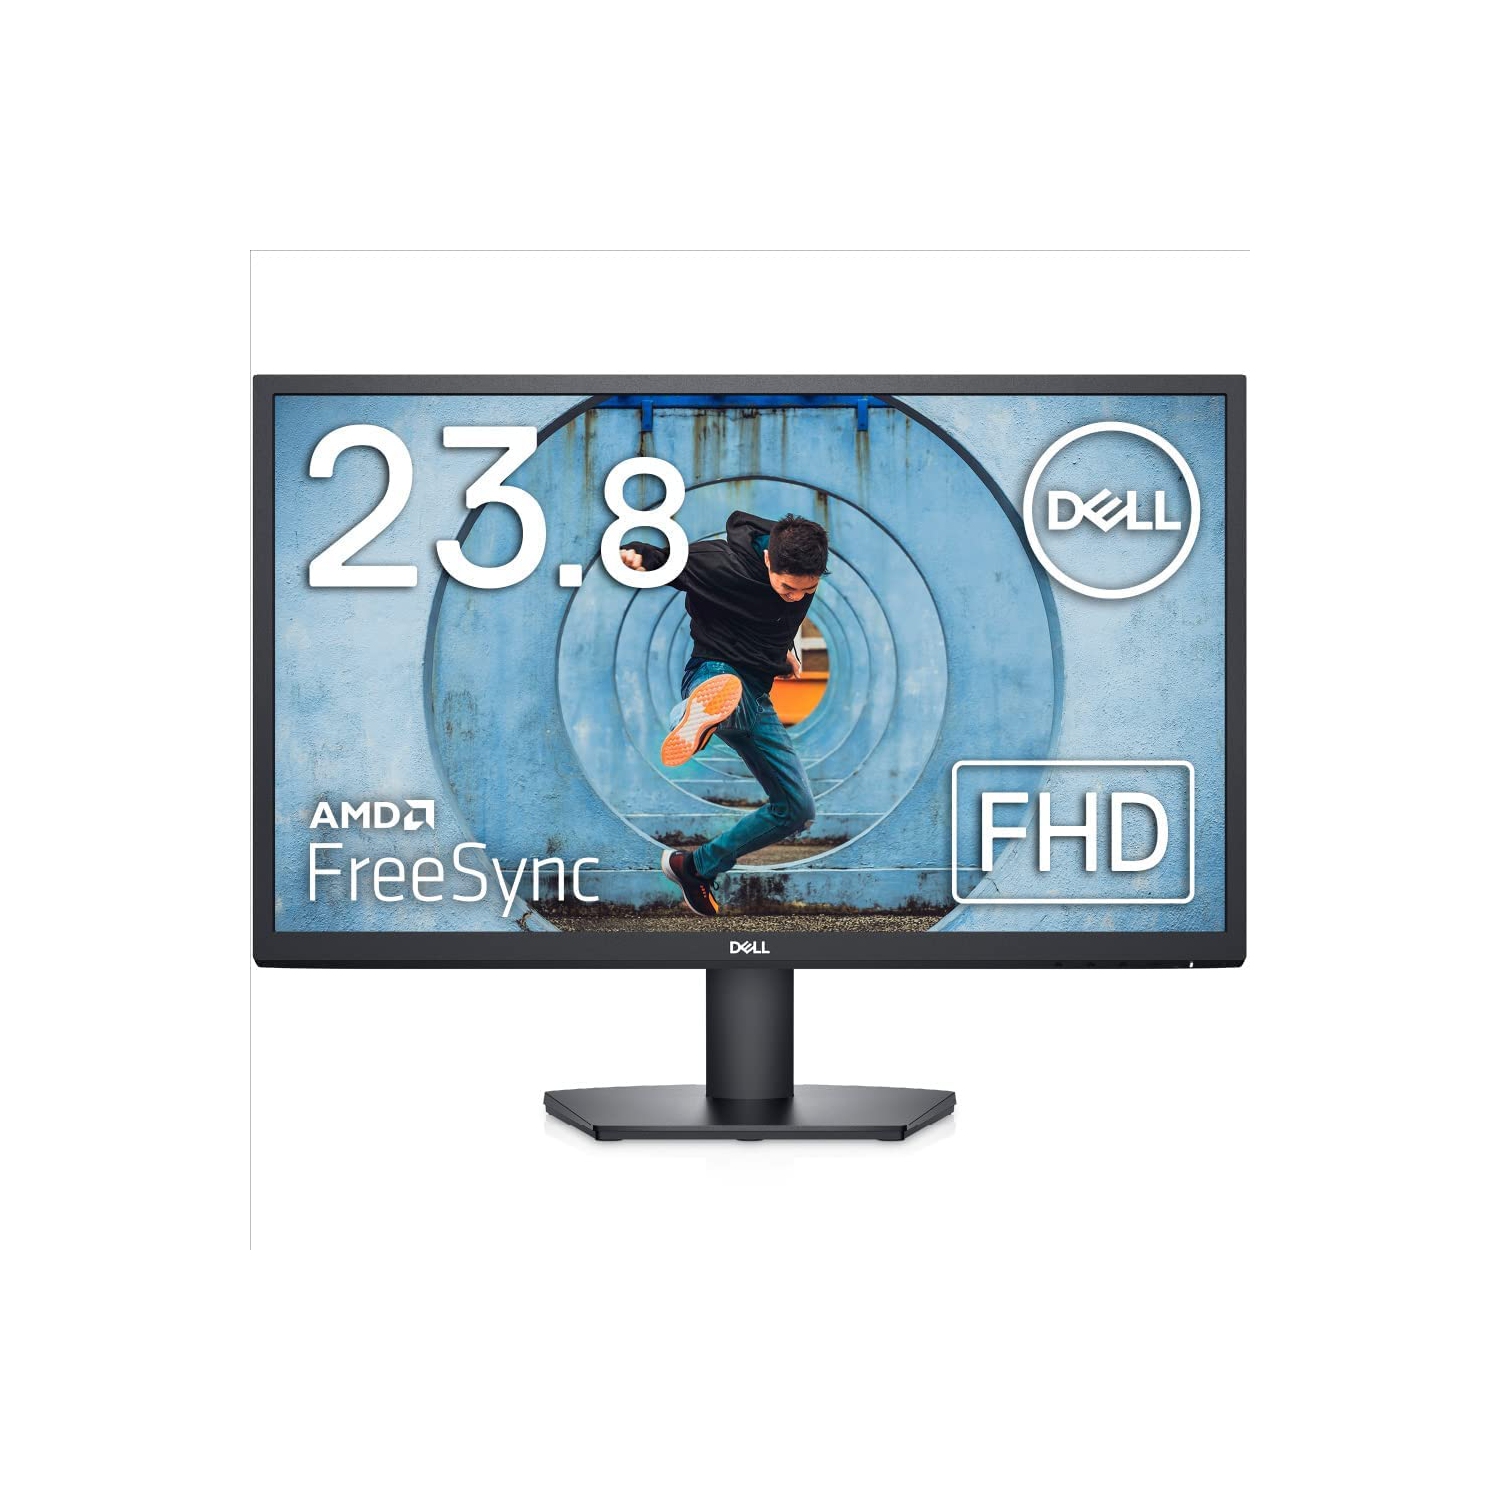  Dell SE2422HX Monitor - 24 inch FHD (1920 x 1080) 16:9 Ratio  with Comfortview (TUV-Certified), 75Hz Refresh Rate, 16.7 Million Colors,  Anti-Glare Screen with 3H Hardness - Black : Electronics